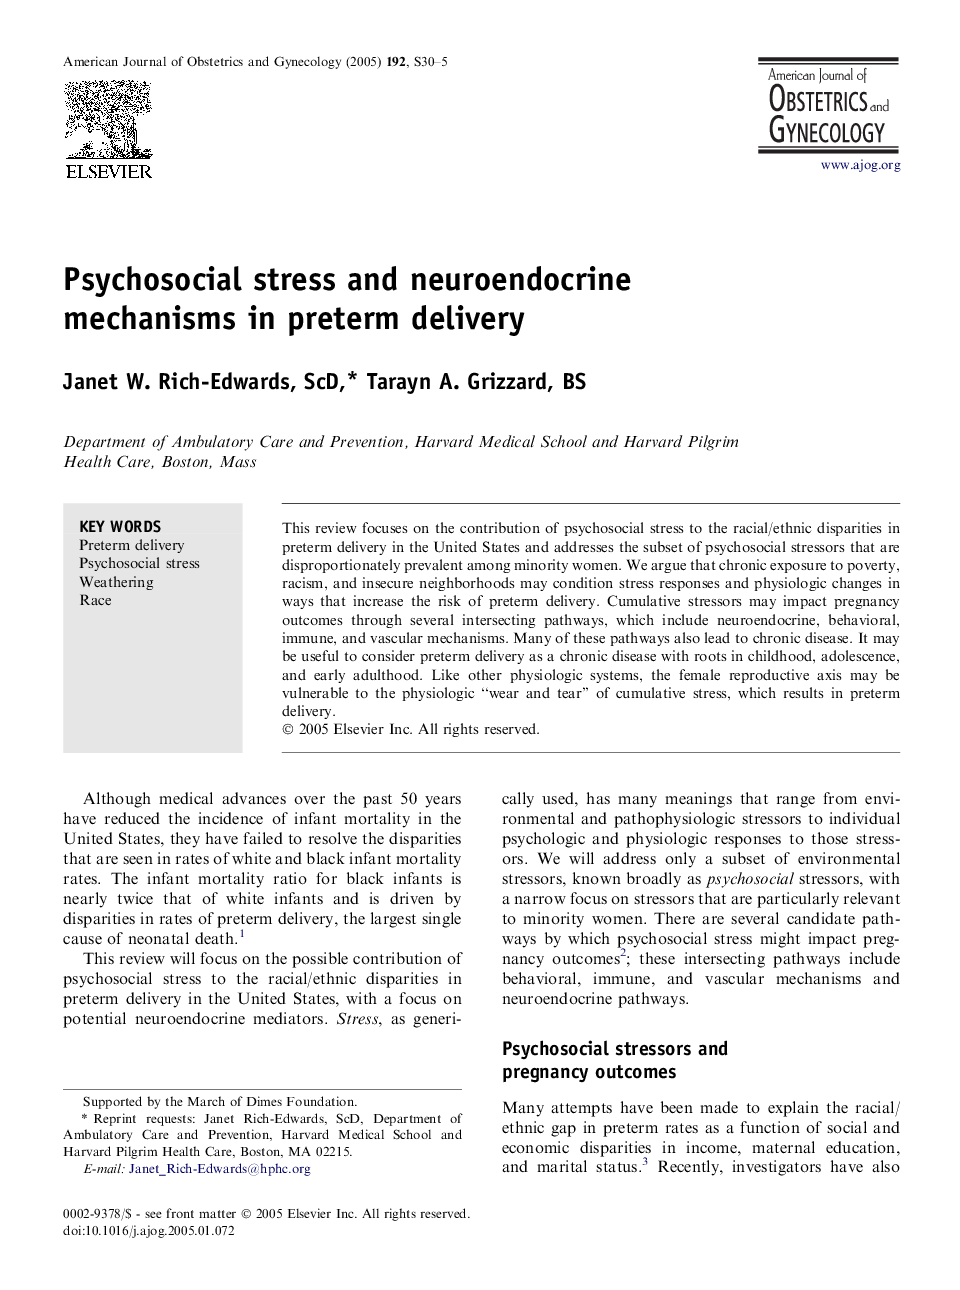 Psychosocial stress and neuroendocrine mechanisms in preterm delivery